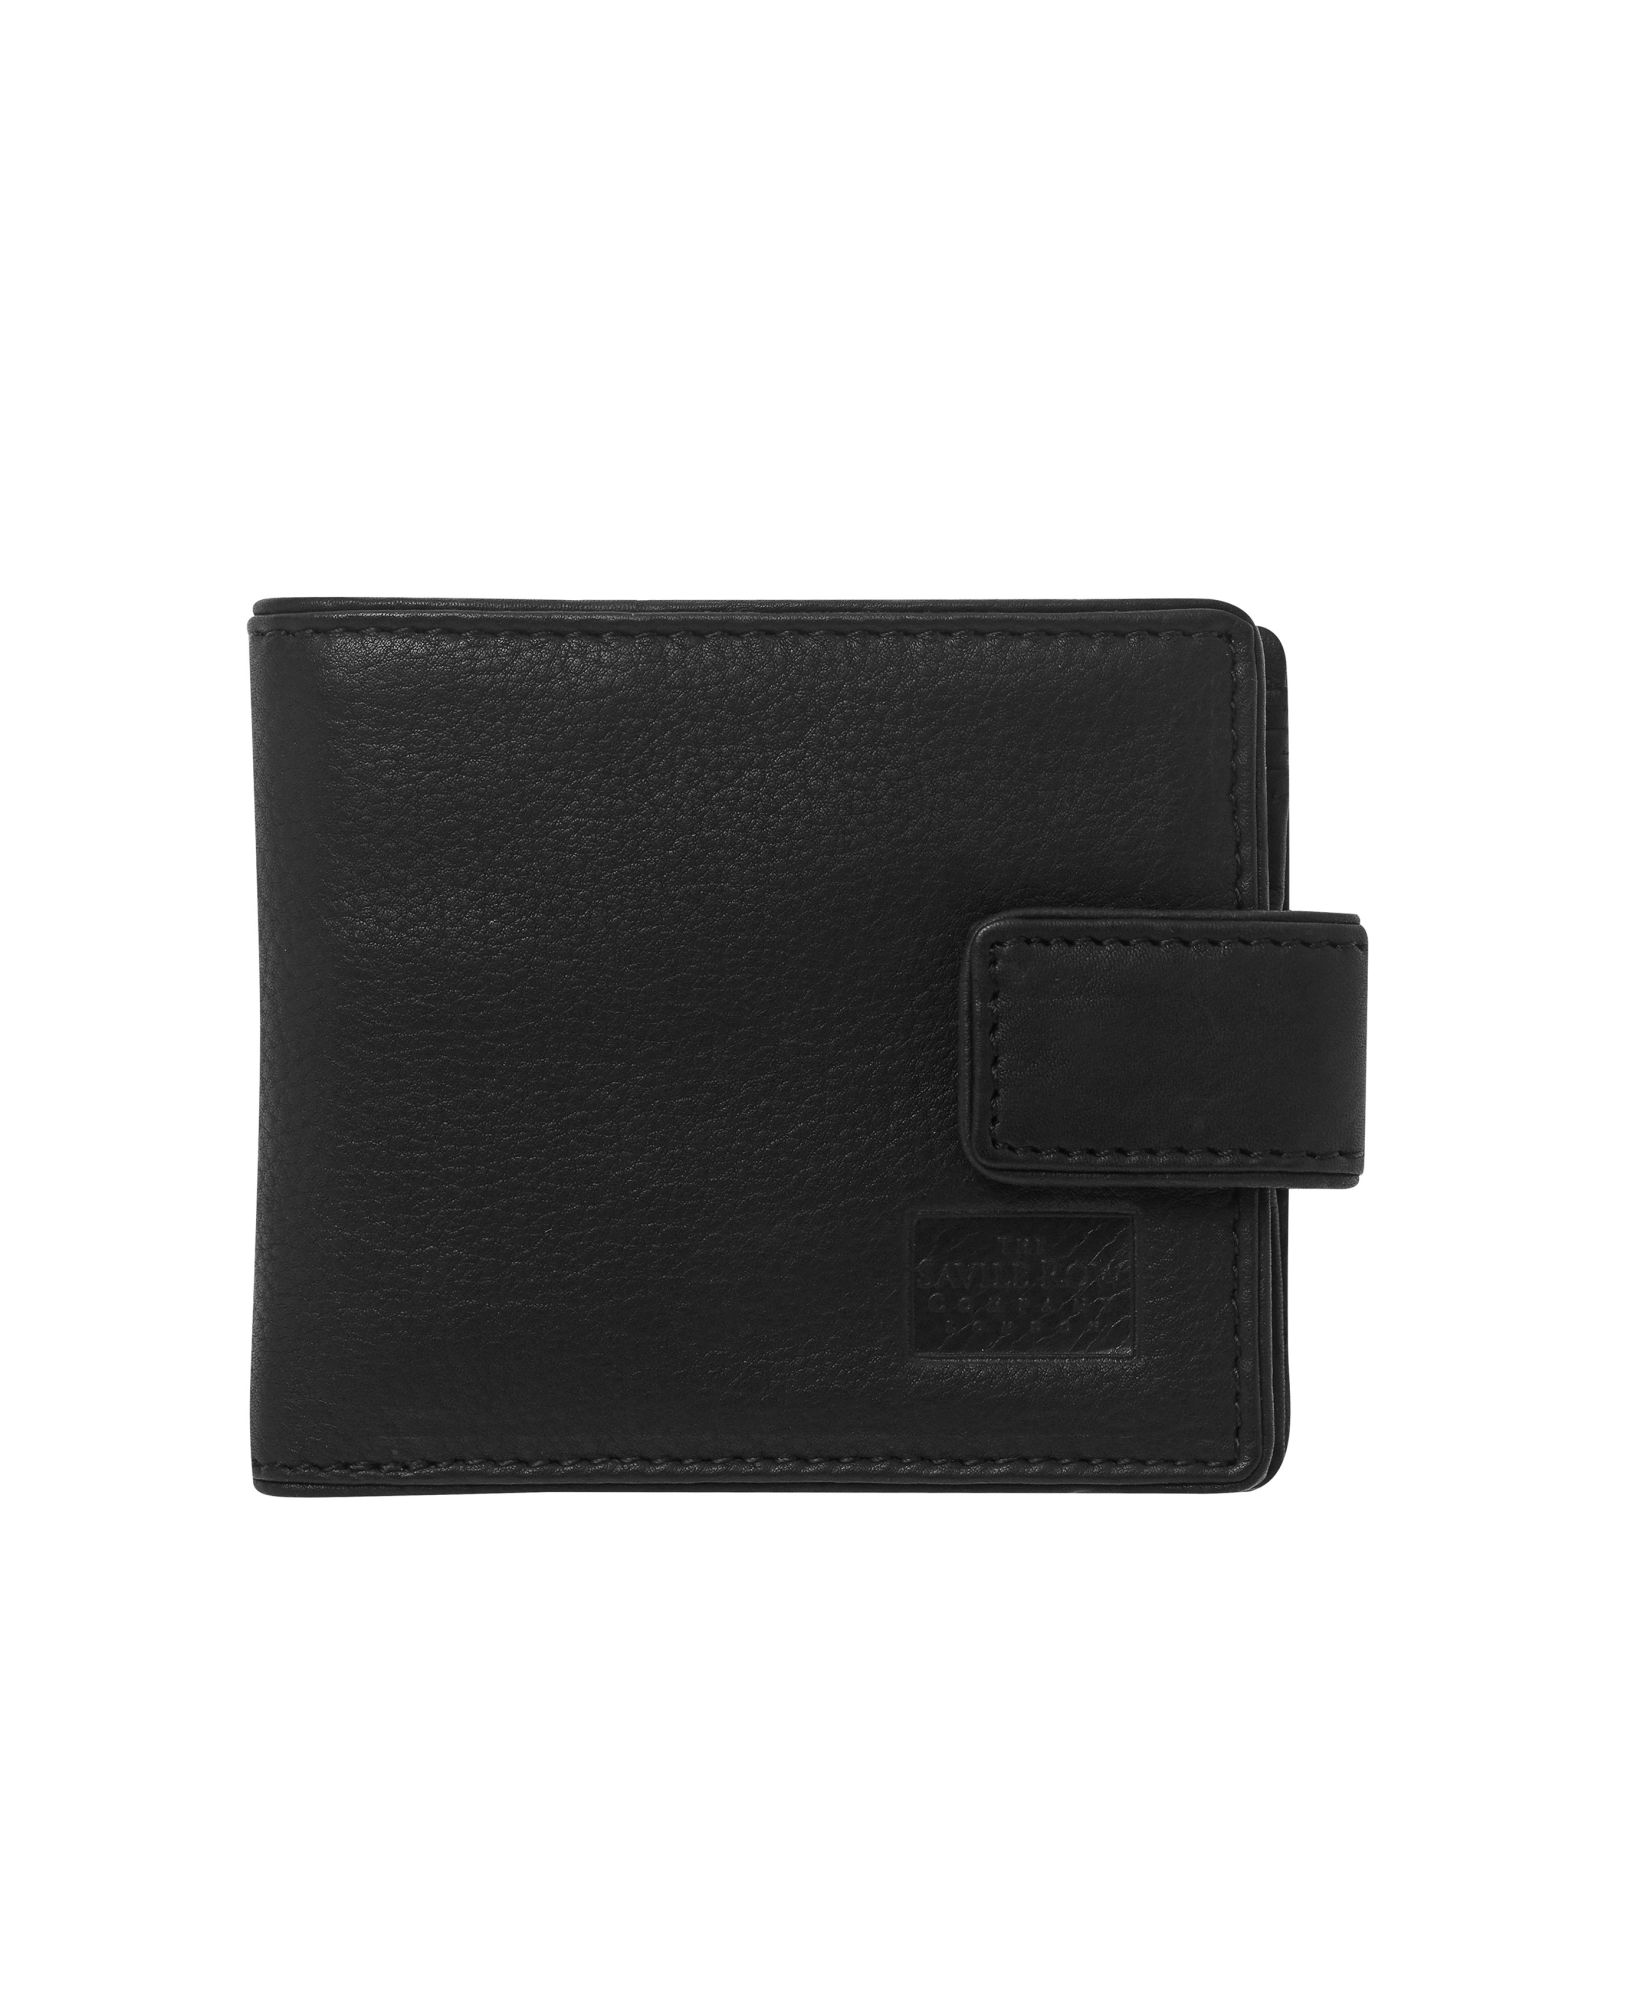 Image of Black Leather Classic Tab Coin Wallet